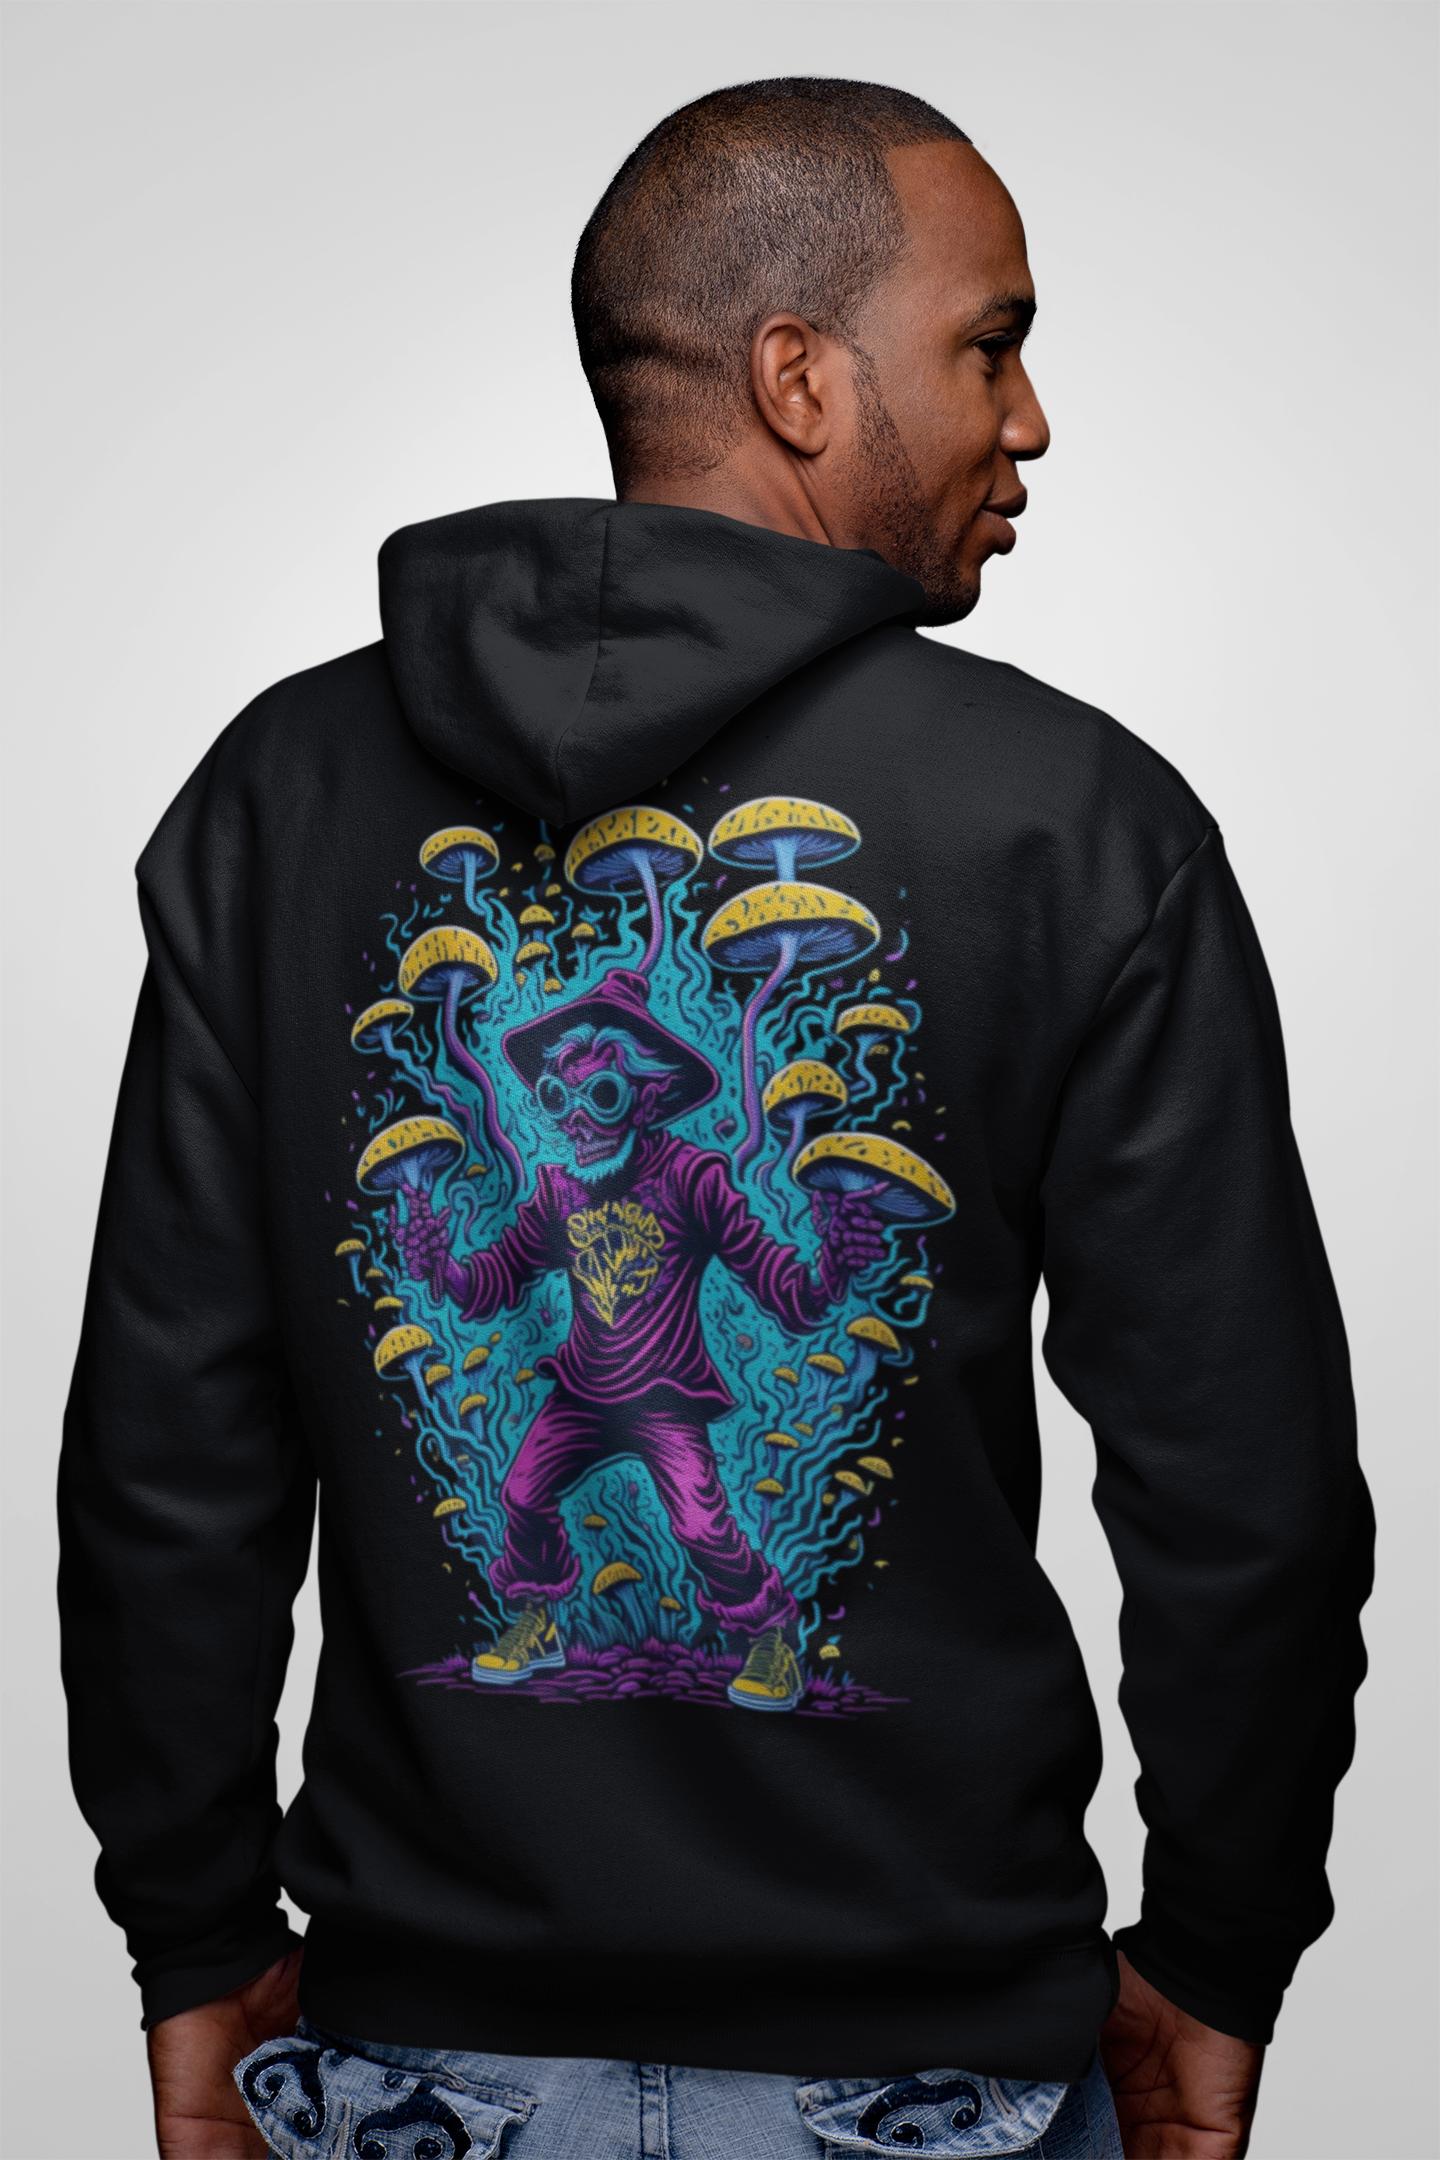 Psychedelic Rave Party - Unisex Hoodie - CatsOnDrugs